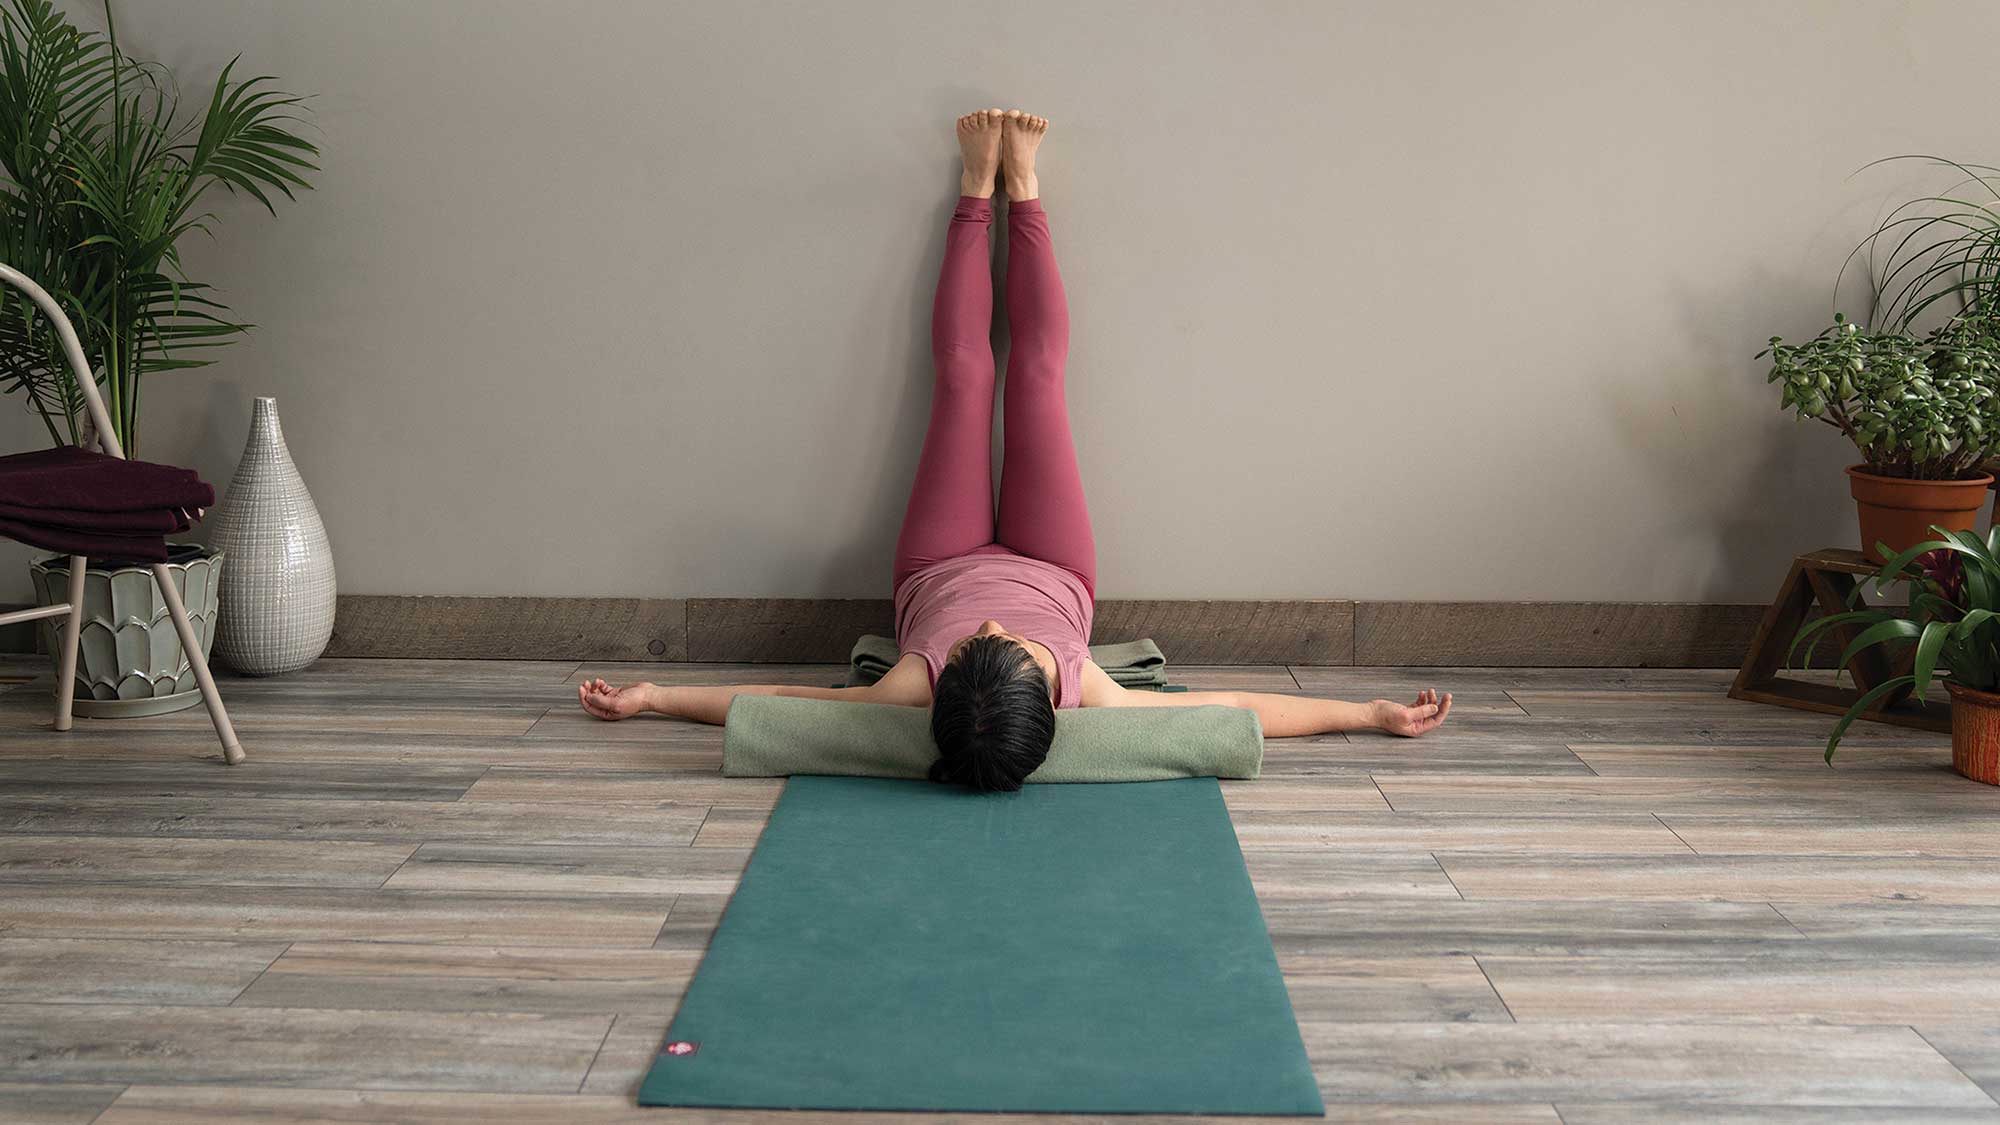 5 Yoga Poses for a Full Body Workout | by Christina Mattison | Medium